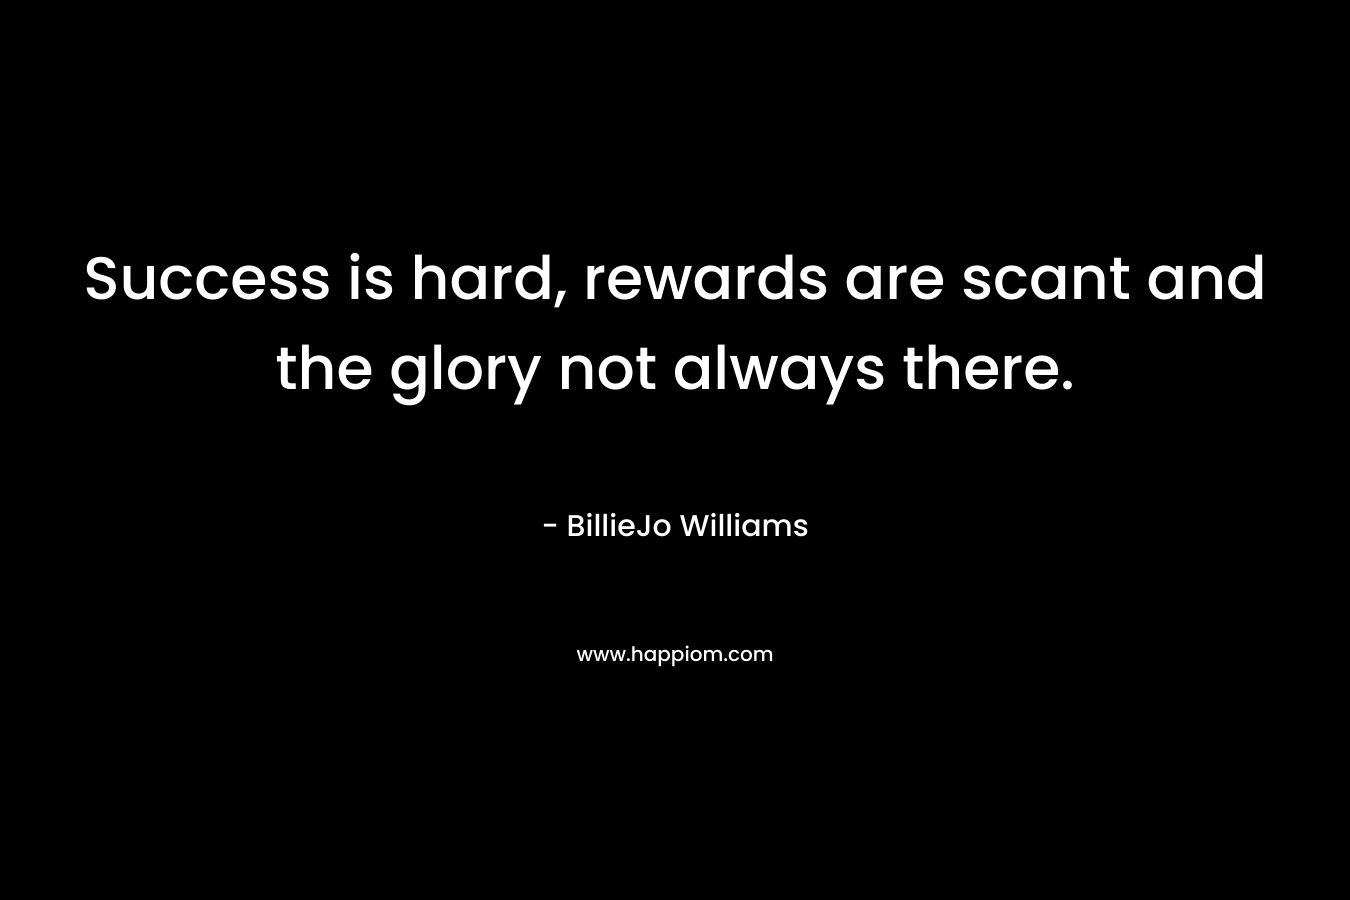 Success is hard, rewards are scant and the glory not always there. – BillieJo Williams